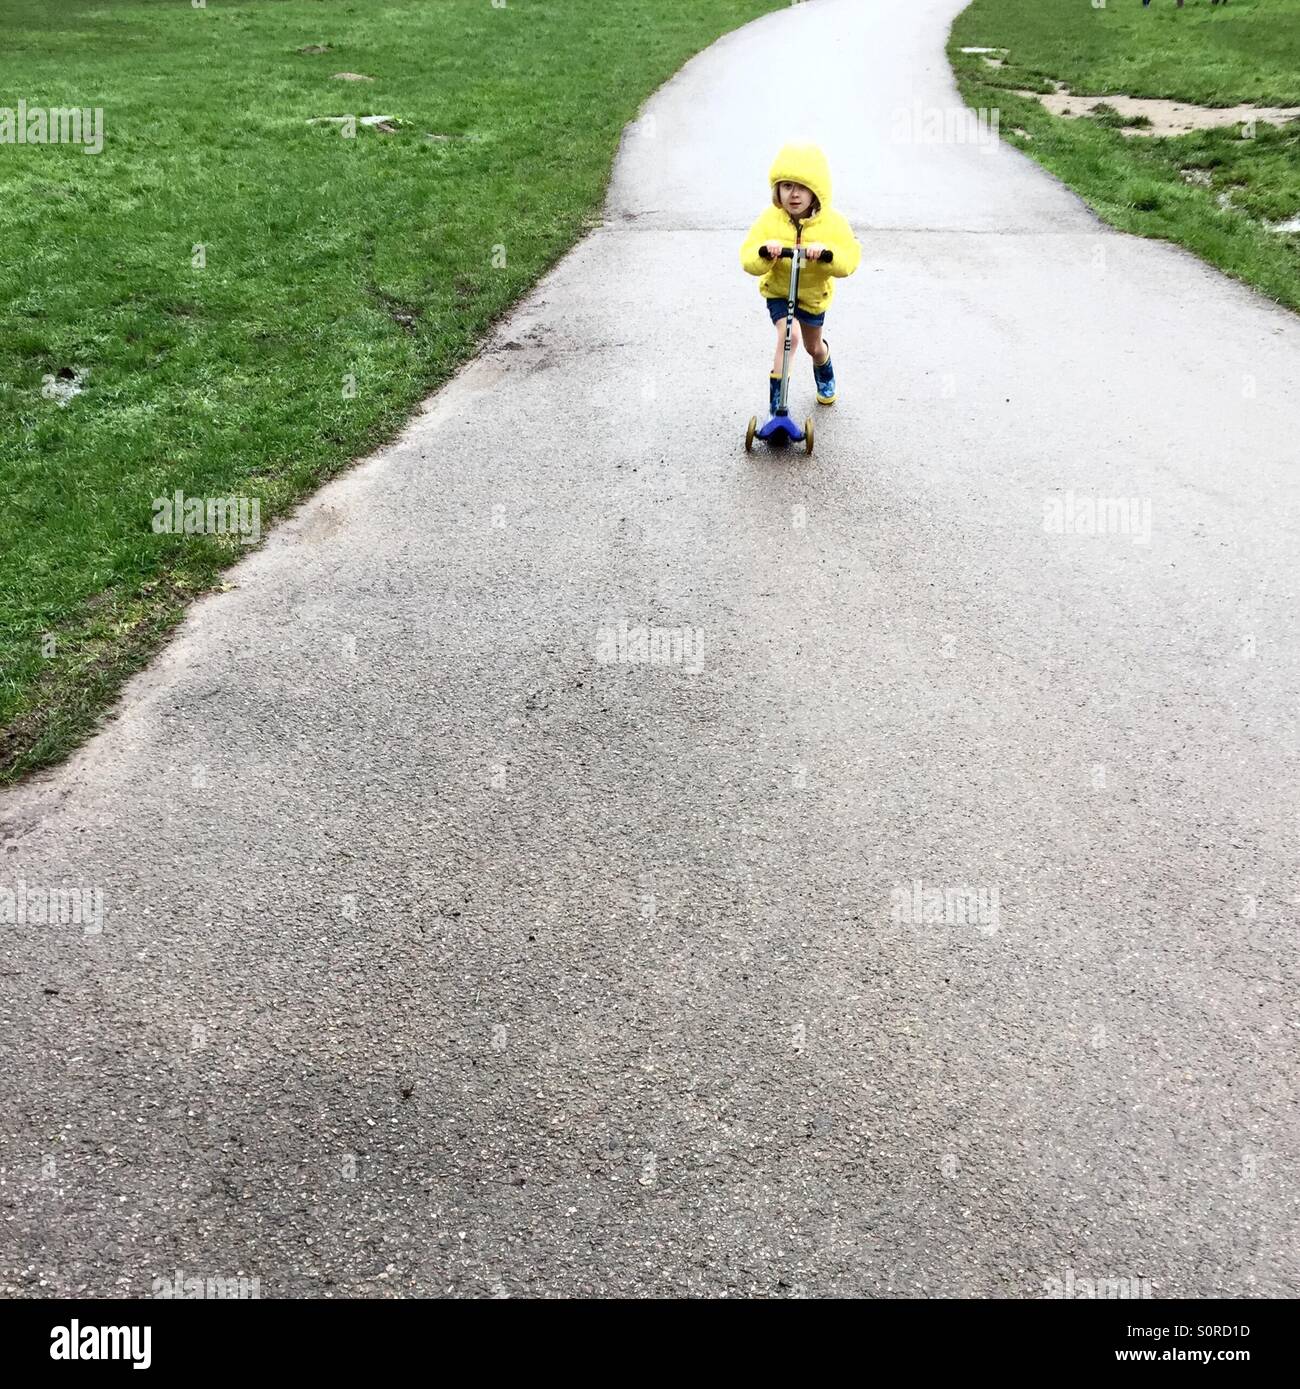 5 year old girl with a yellow coat on a scooter racing Stock Photo